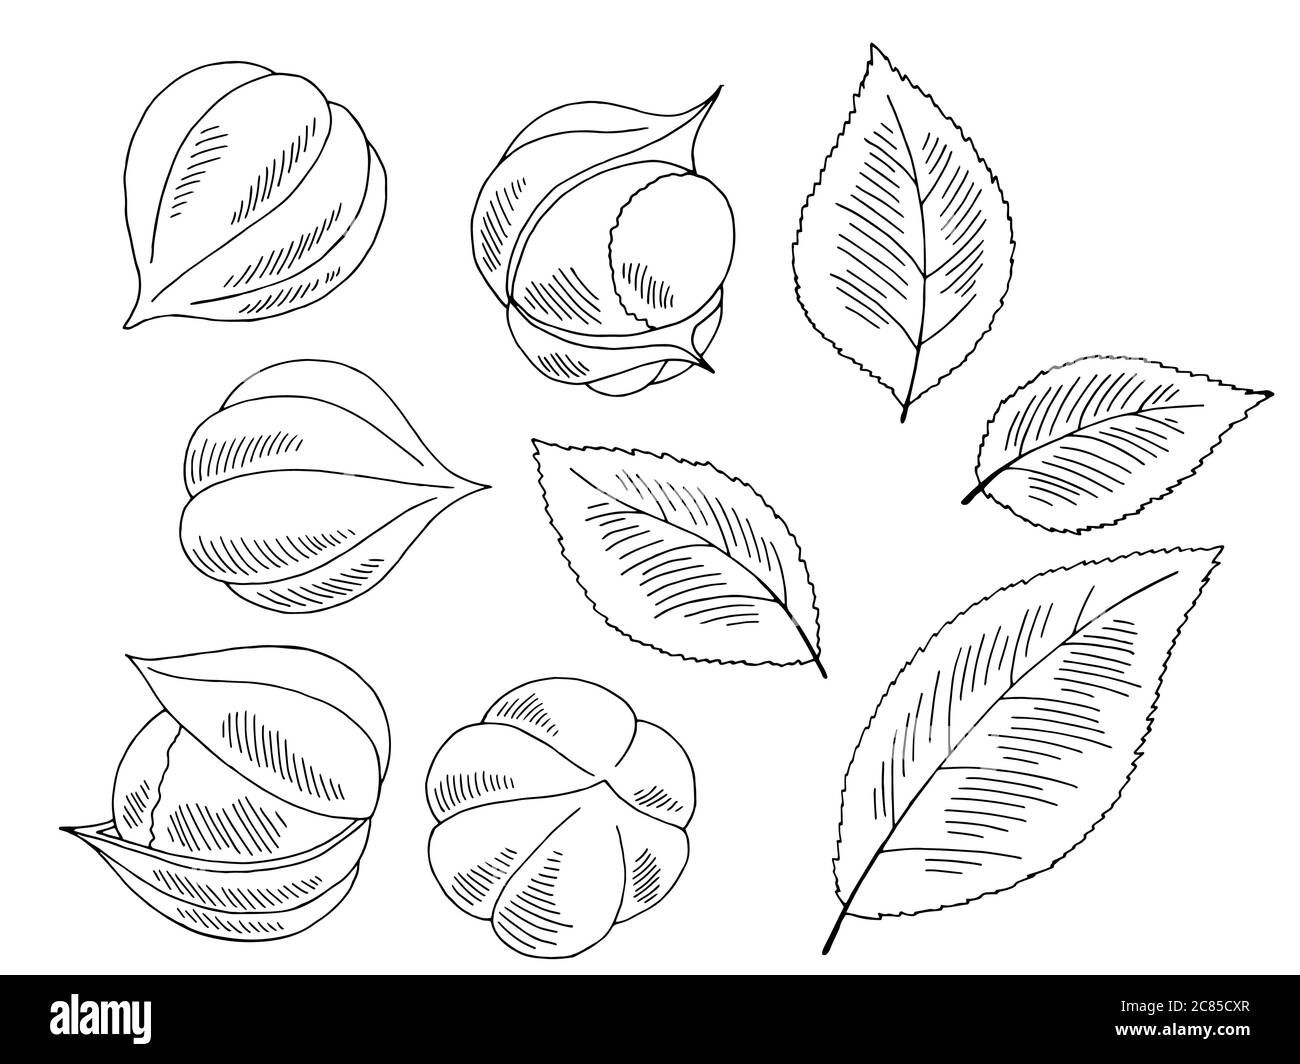 Guarana fruit graphic black white isolated sketch illustration vector Stock Vector